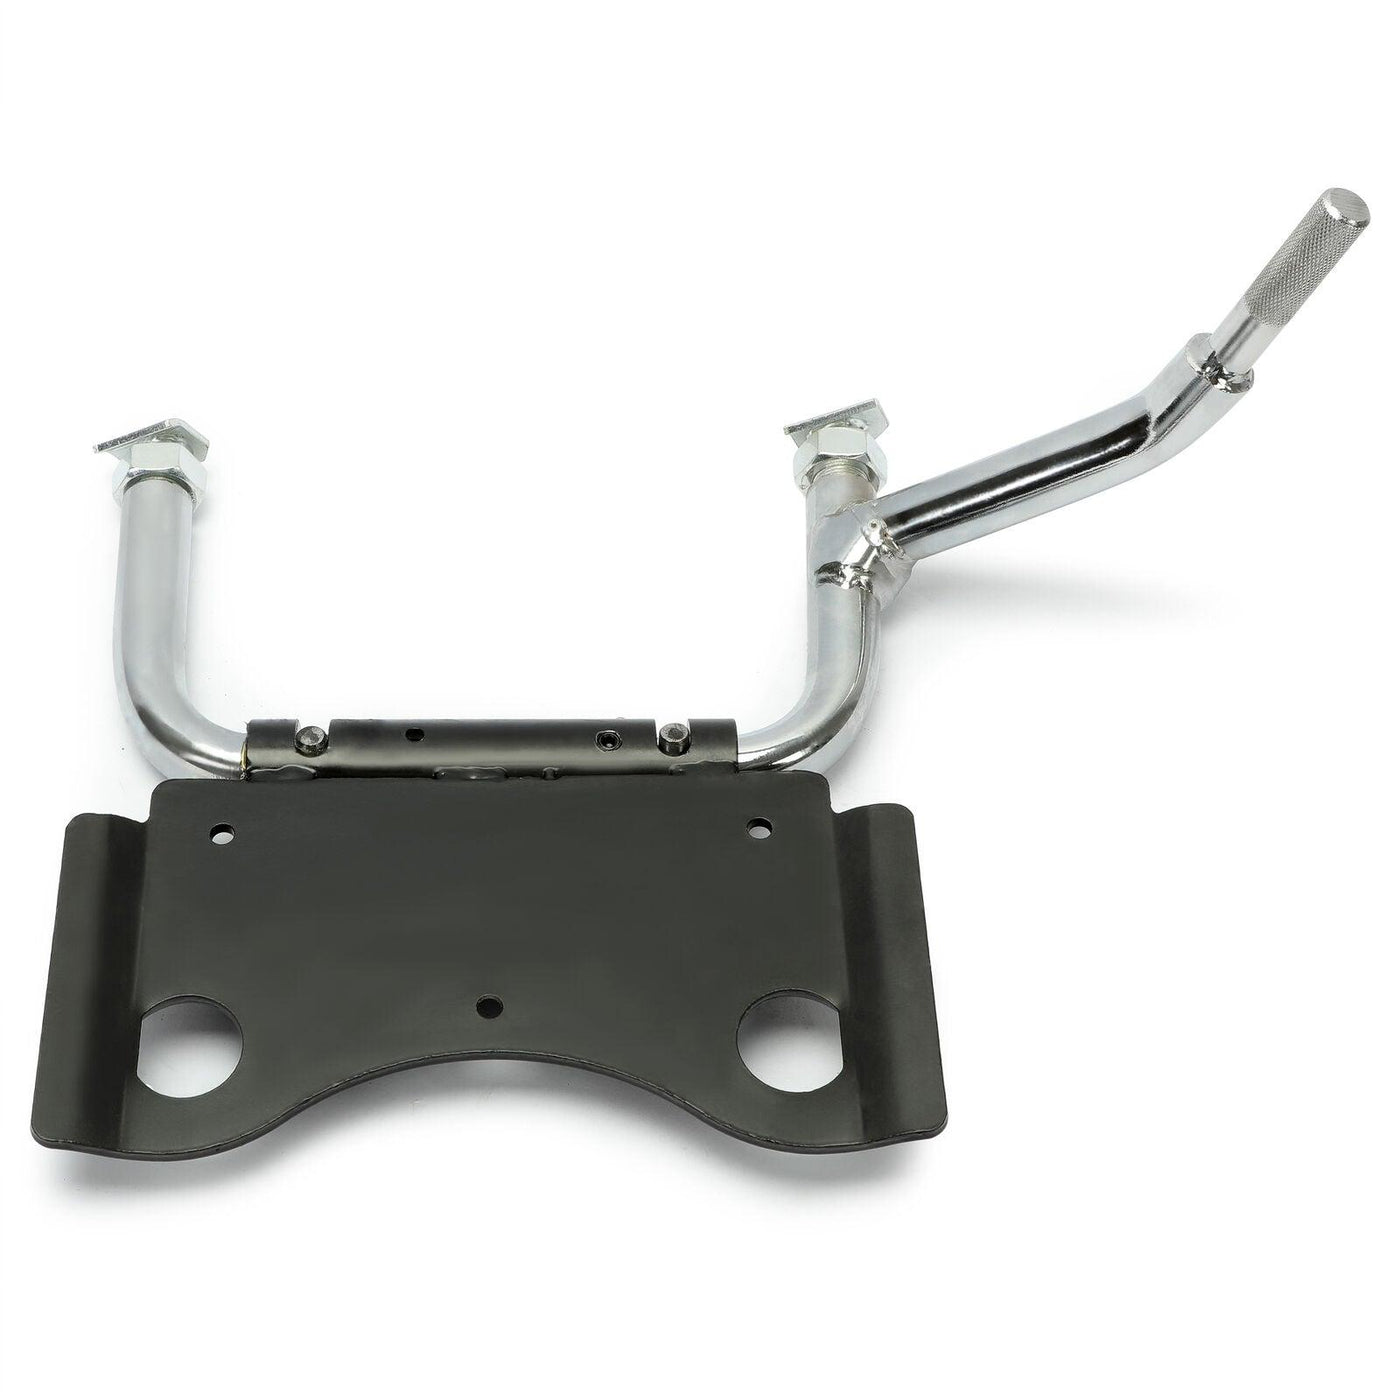 Adjustable Service Center Stand for Harley Touring 2009-21 Replacement 91573-09A - Moto Life Products